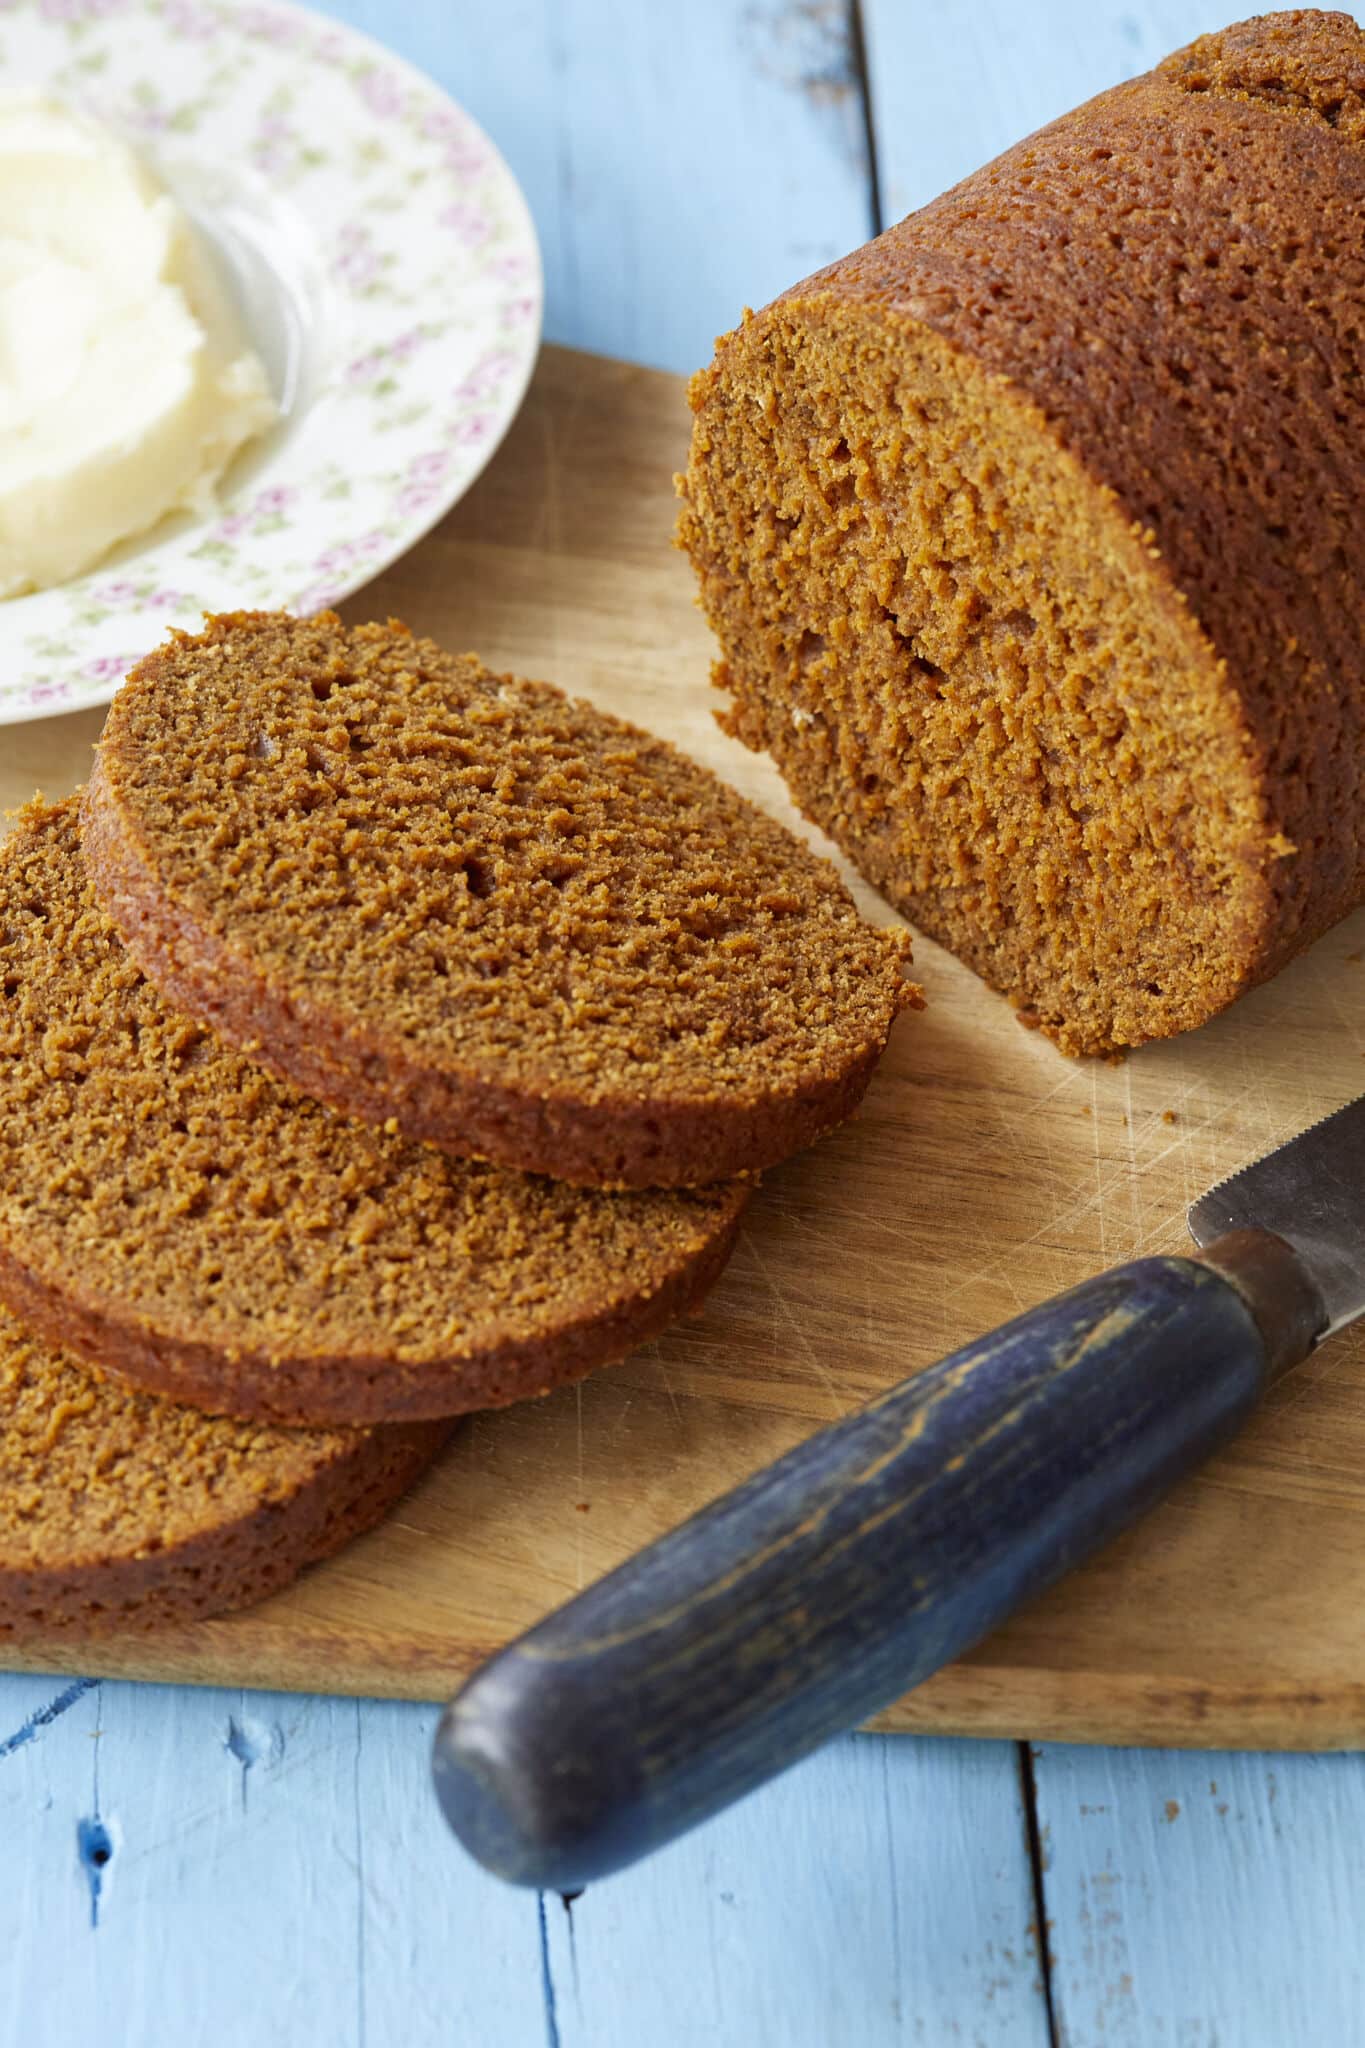 Boston Brown Bread in a can is steamed perfectly with a pleasantly moist and coarse crumb, a note of comforting sweetness, and a rich, dark color.